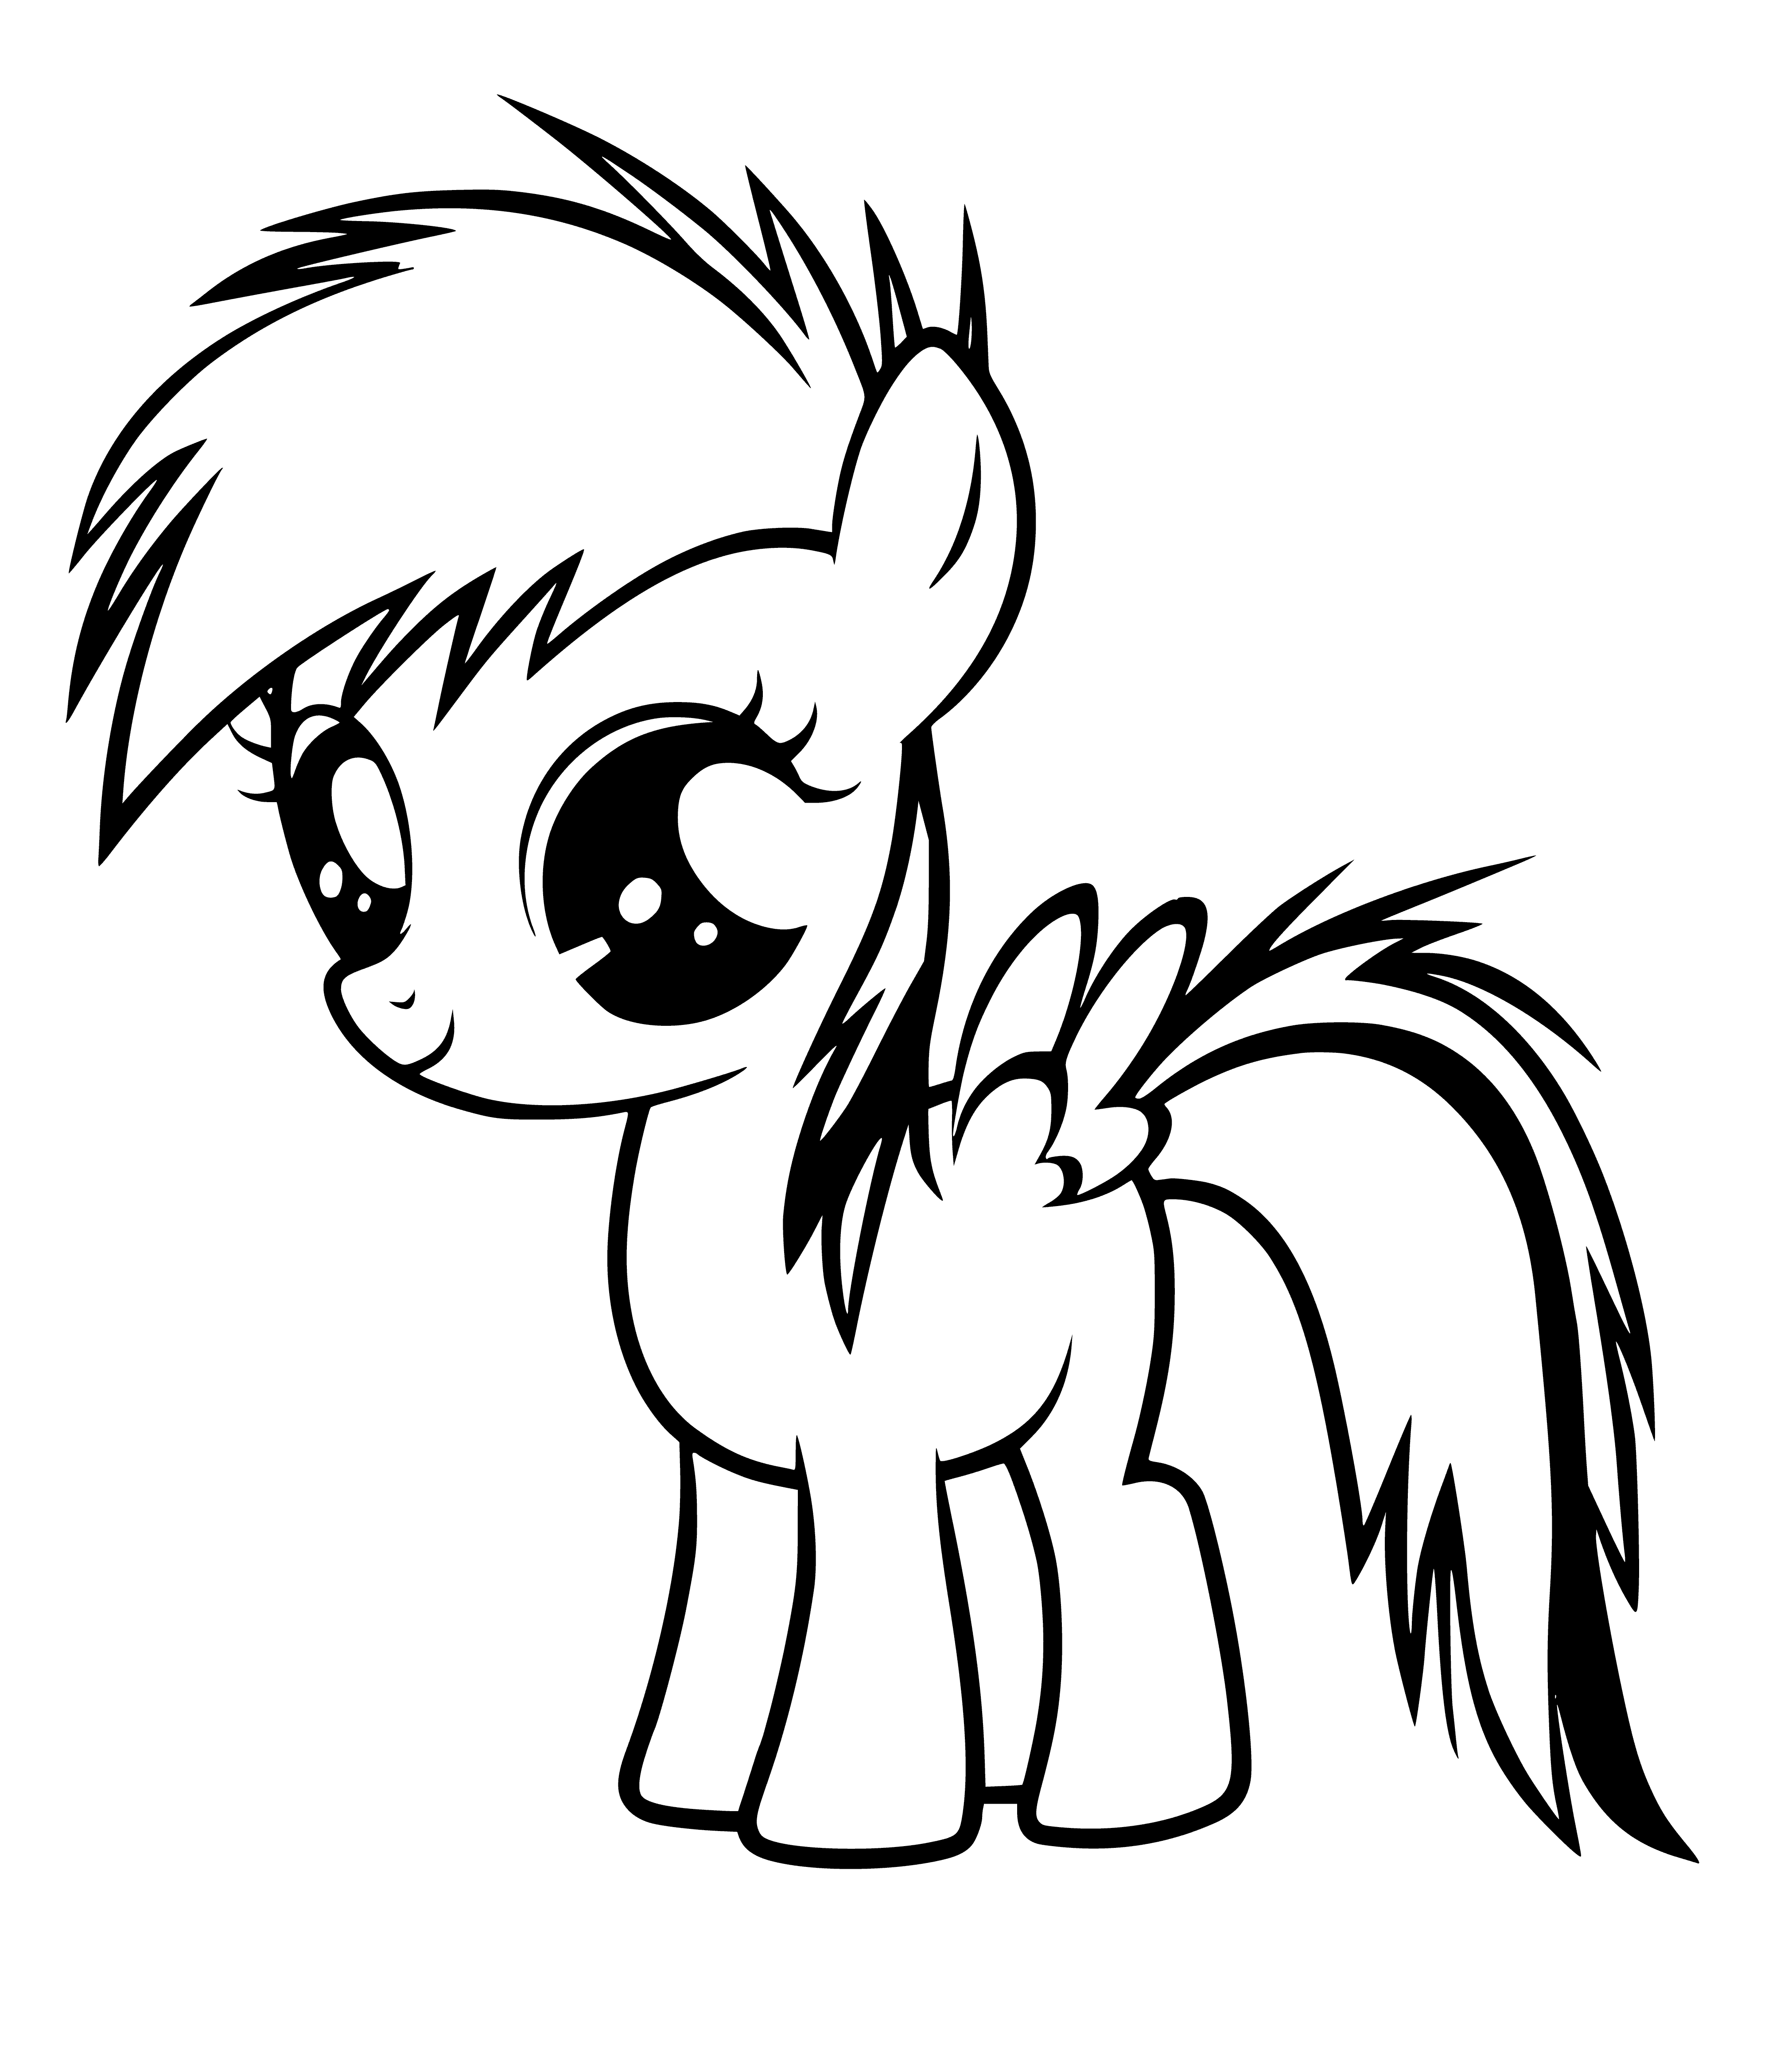 coloring page: Rainbow Dash is a blue pony with a rainbow mane/tail and cutie mark of a rainbow lightning bolt. She joyfully flies the sky with determination.